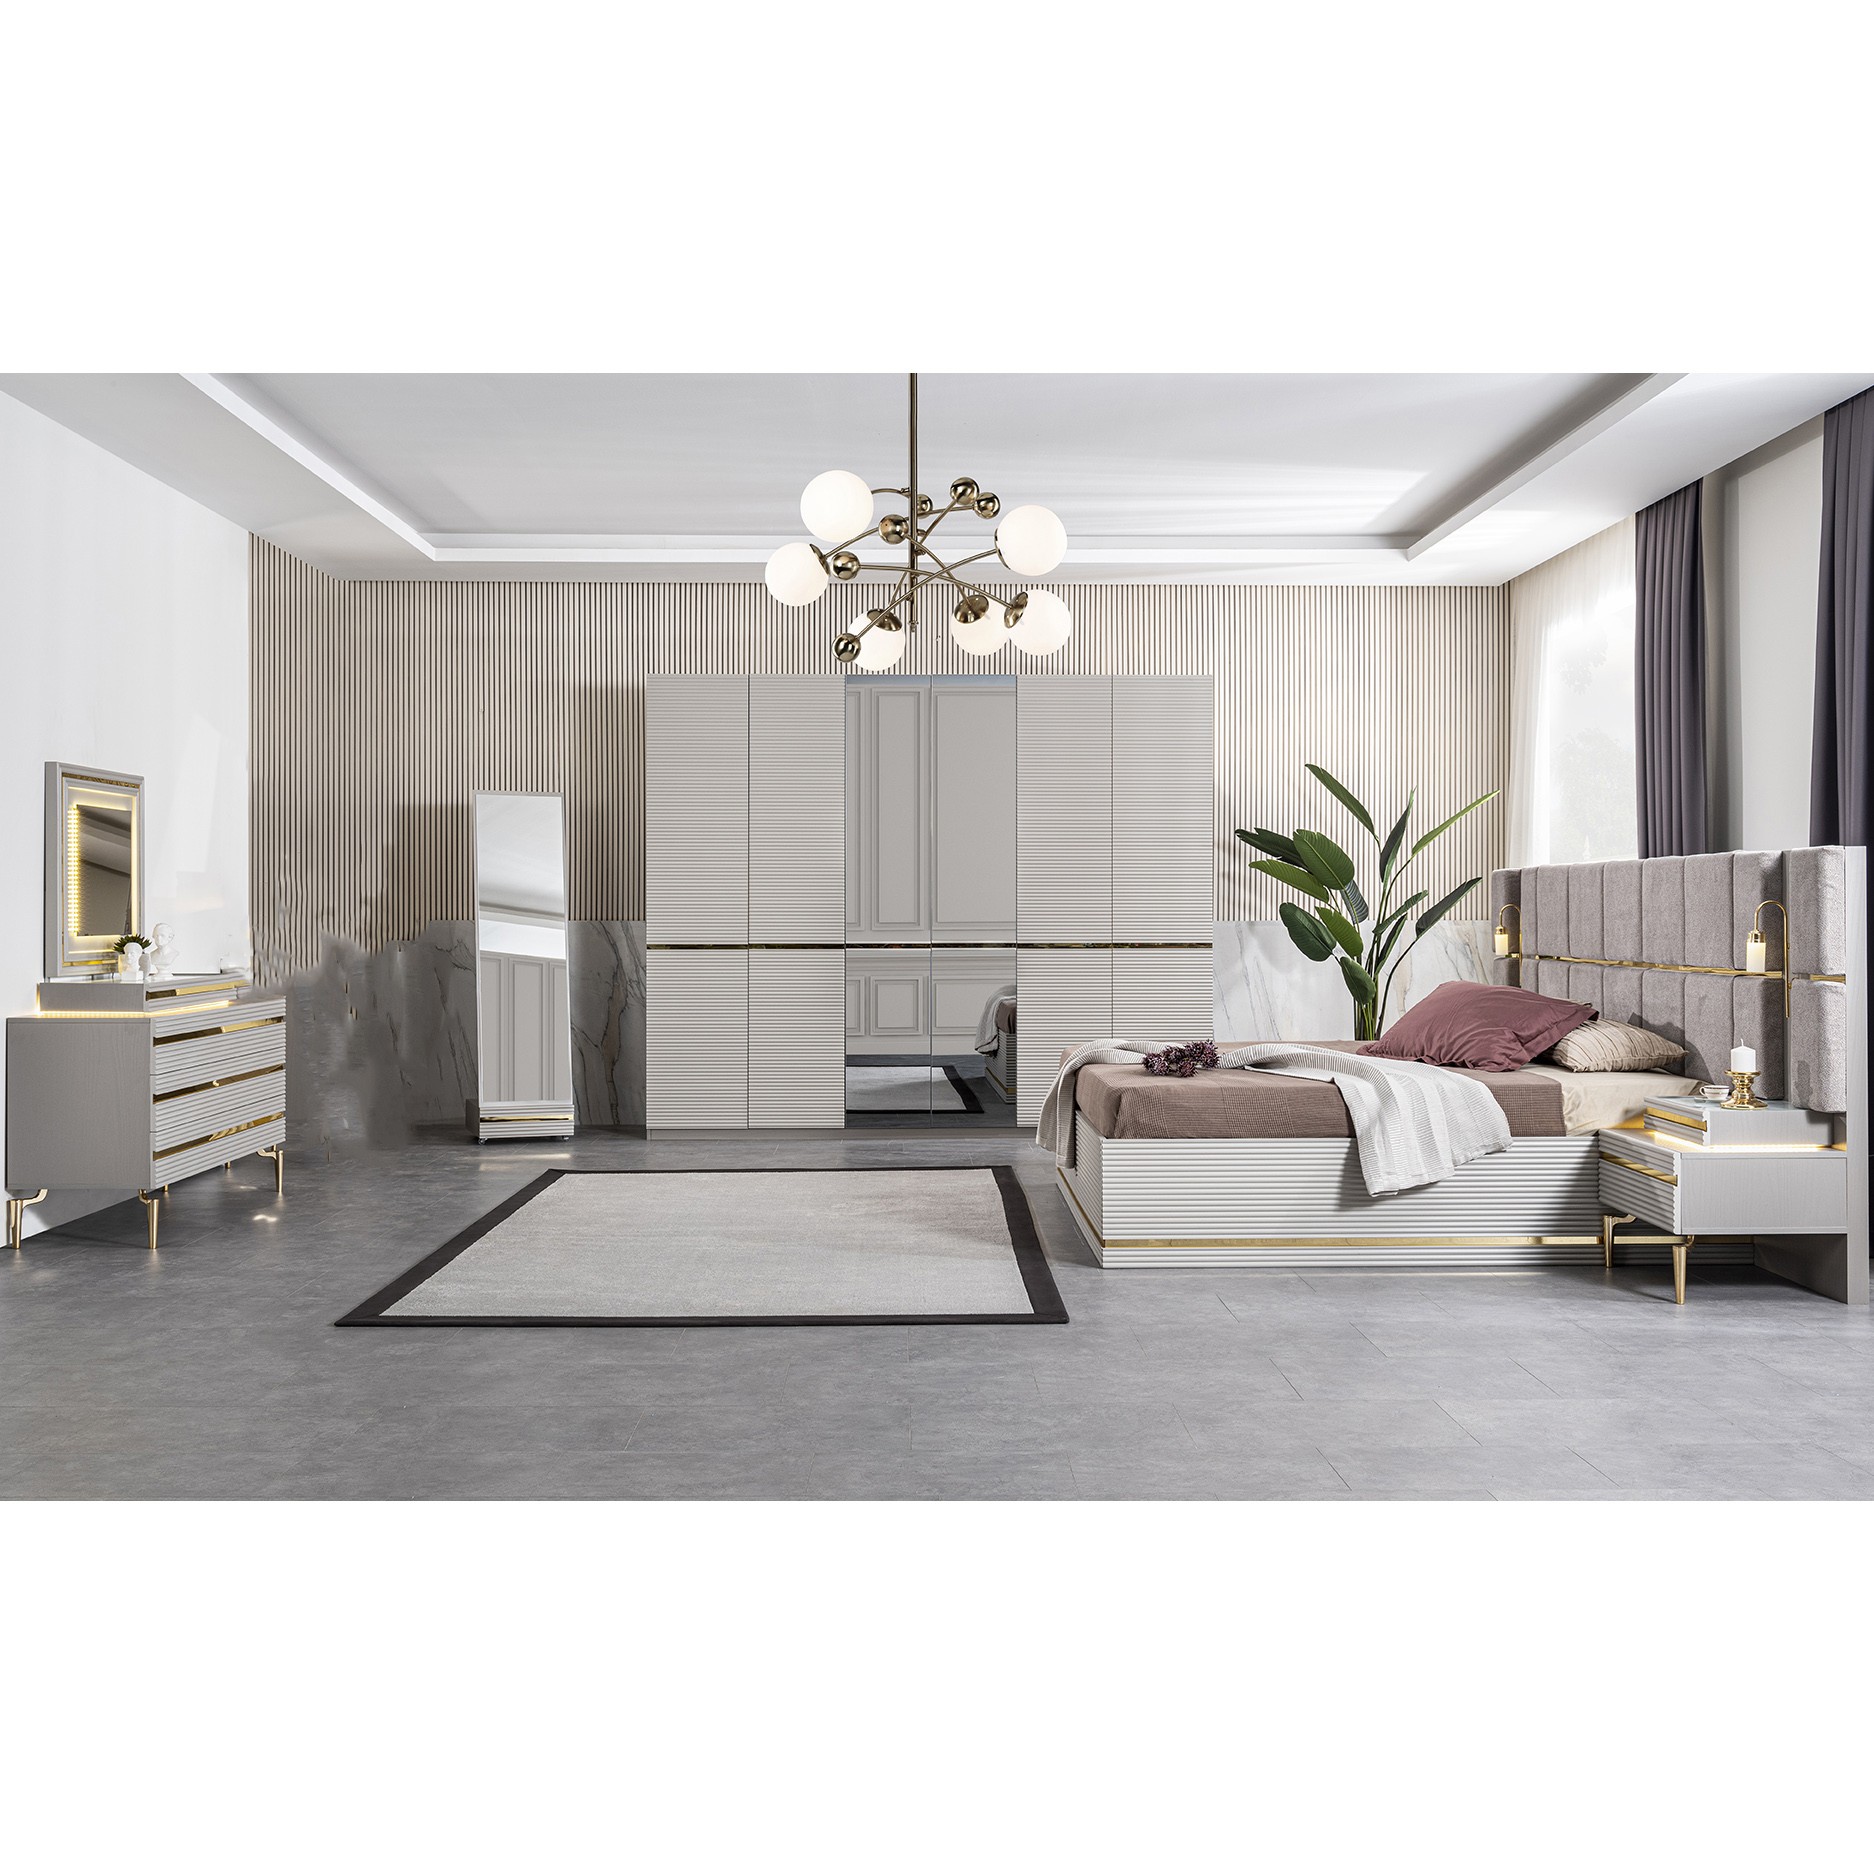 Style Gucci Bedroom (Bed Without Storage 160x200cm)